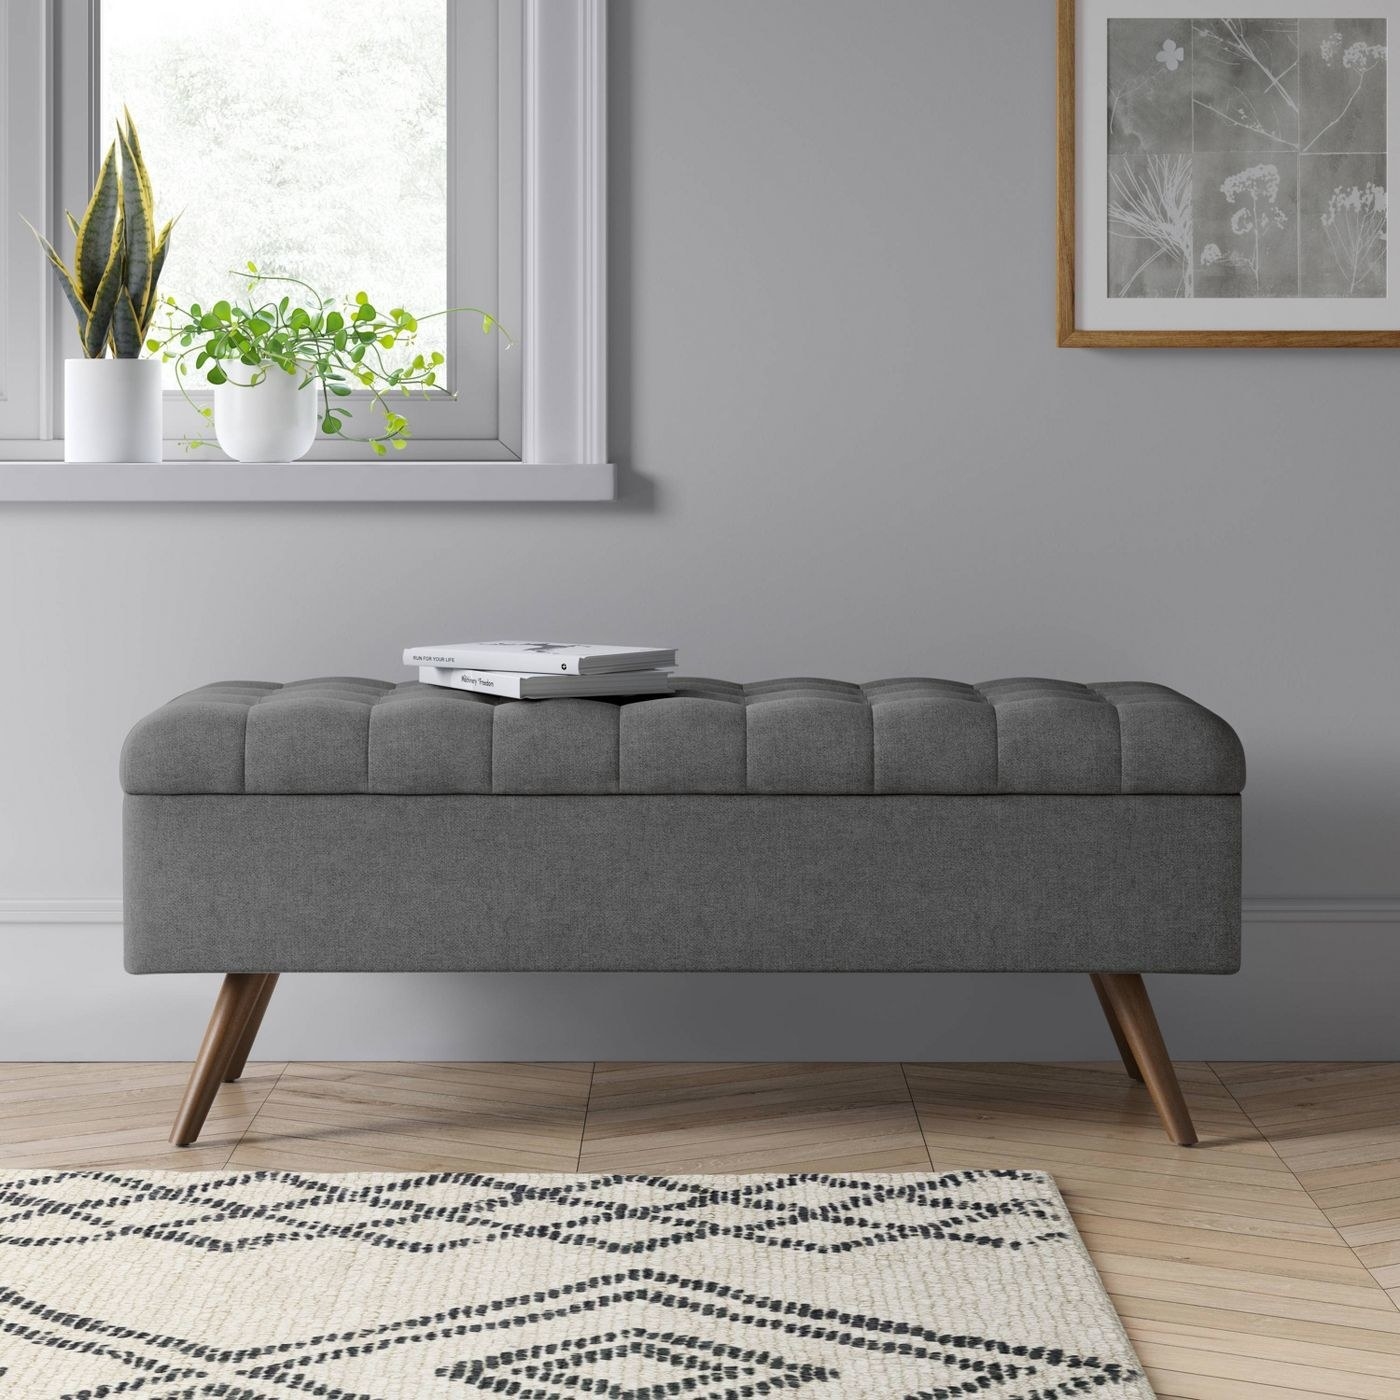 grey upholstered tufted storage bench with books on top